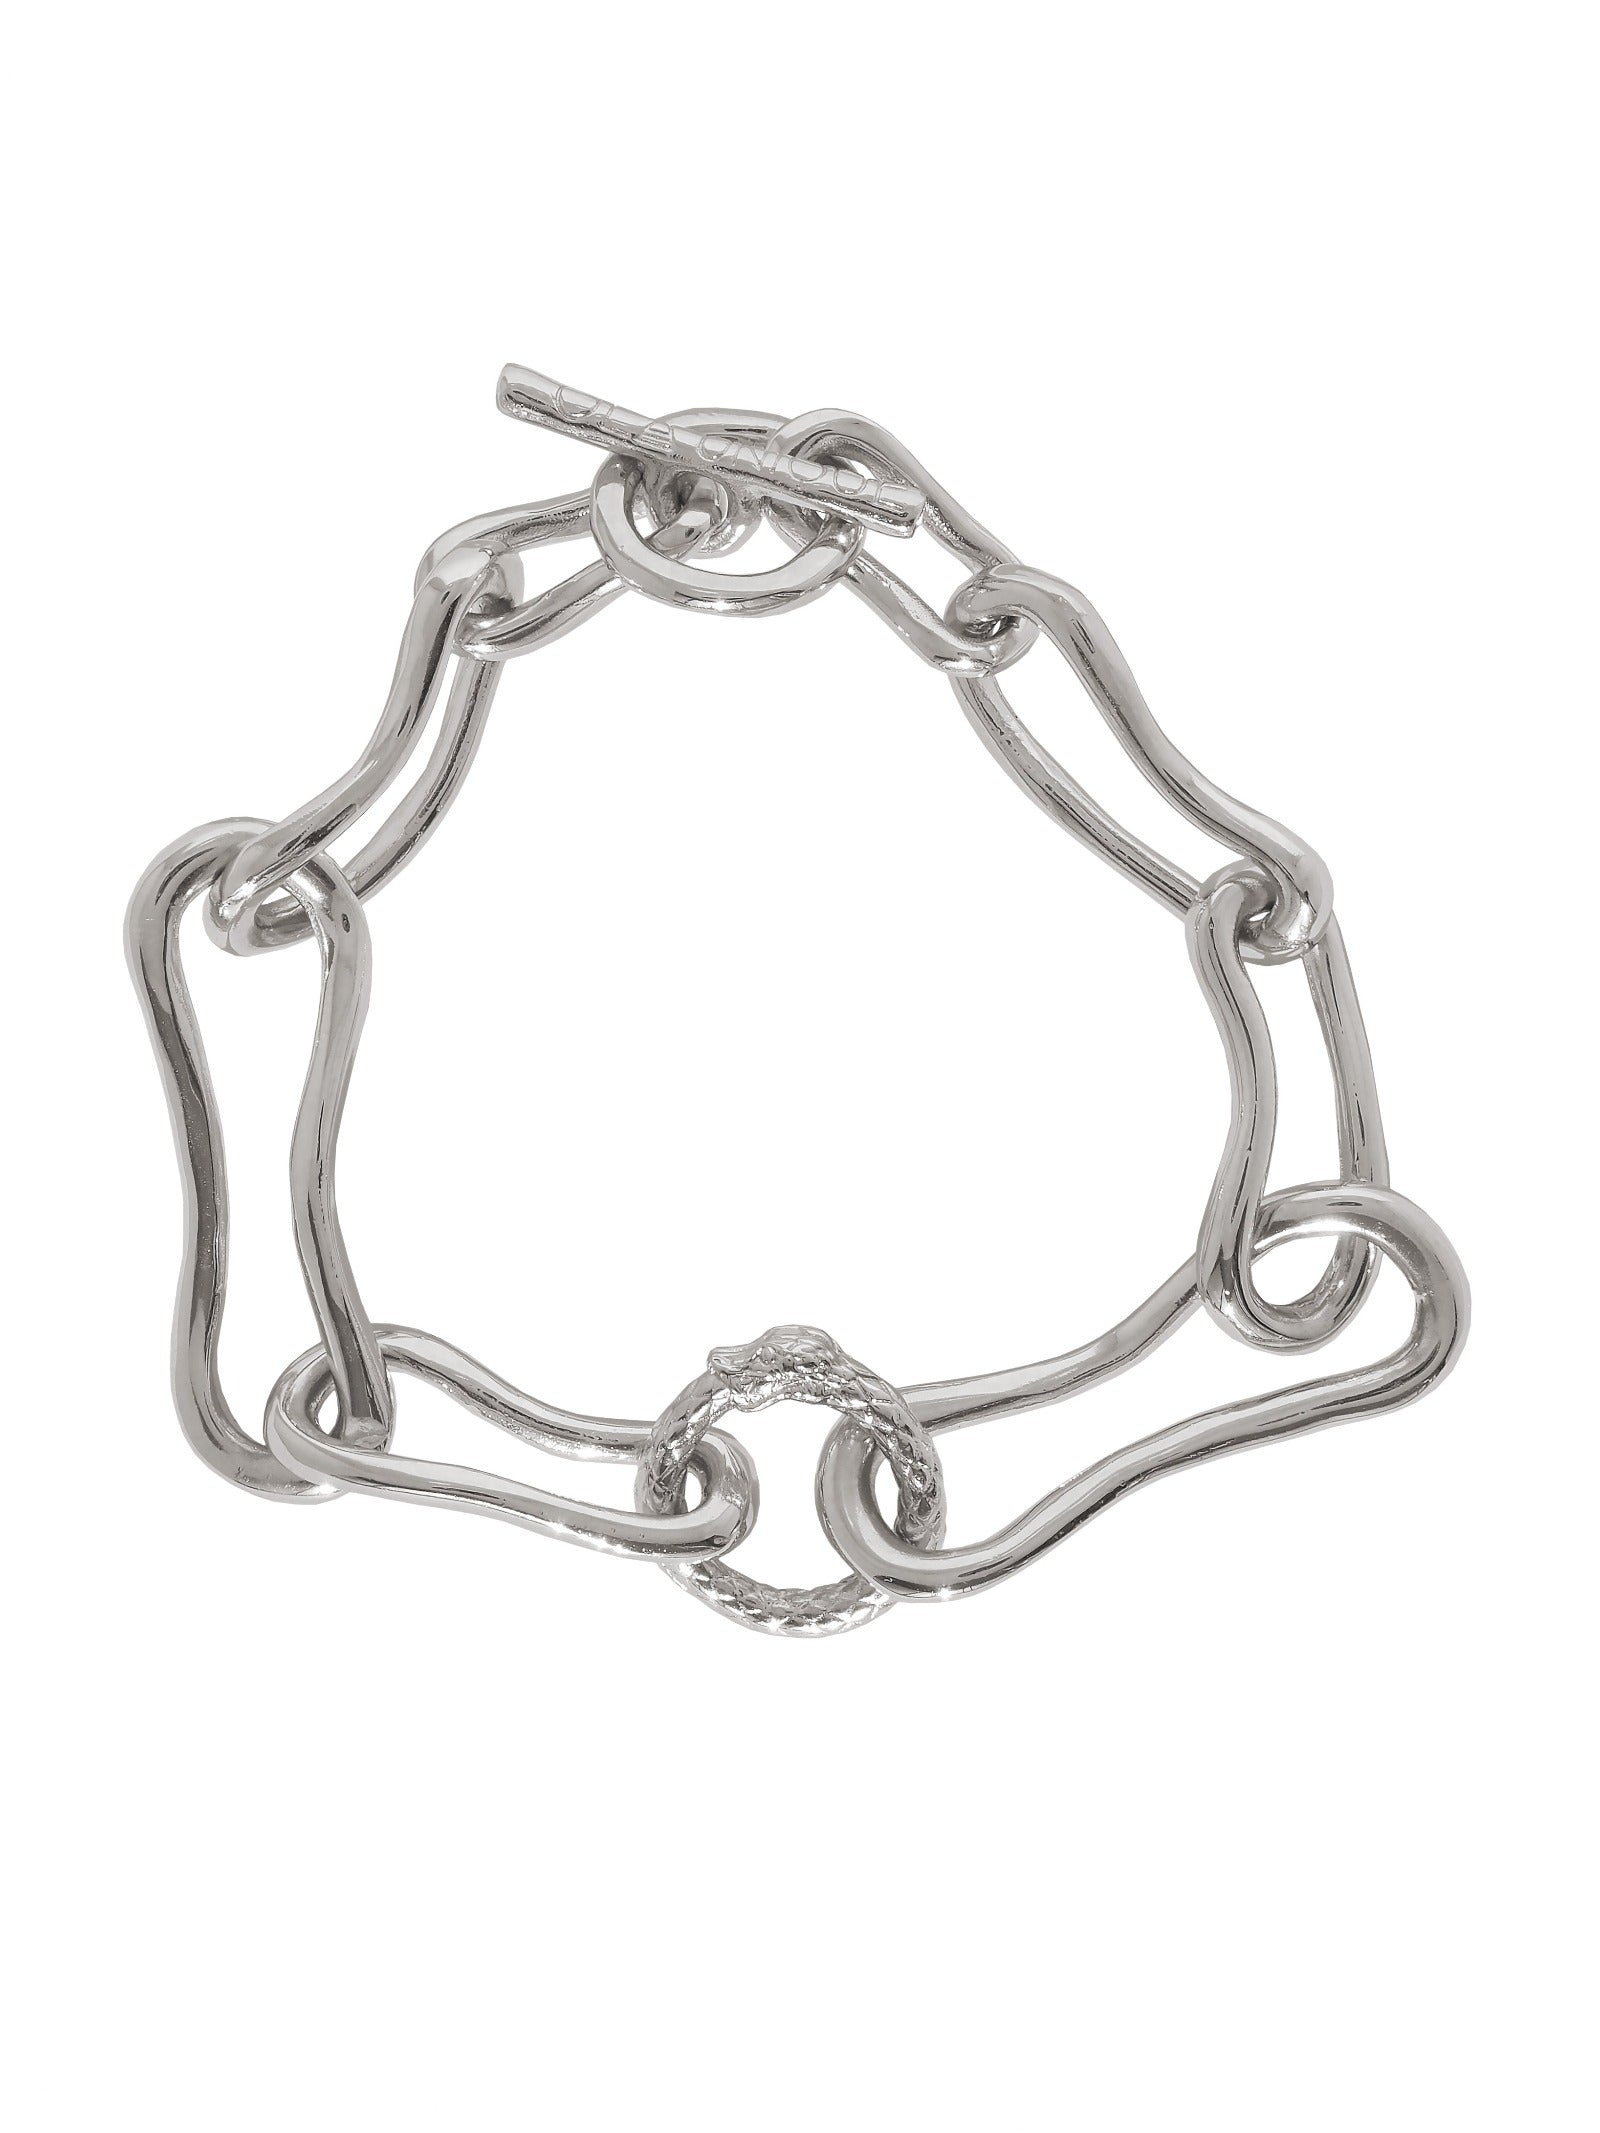 Ouroboros Chunky Bracelet. Silver Plated. Gender Neutral